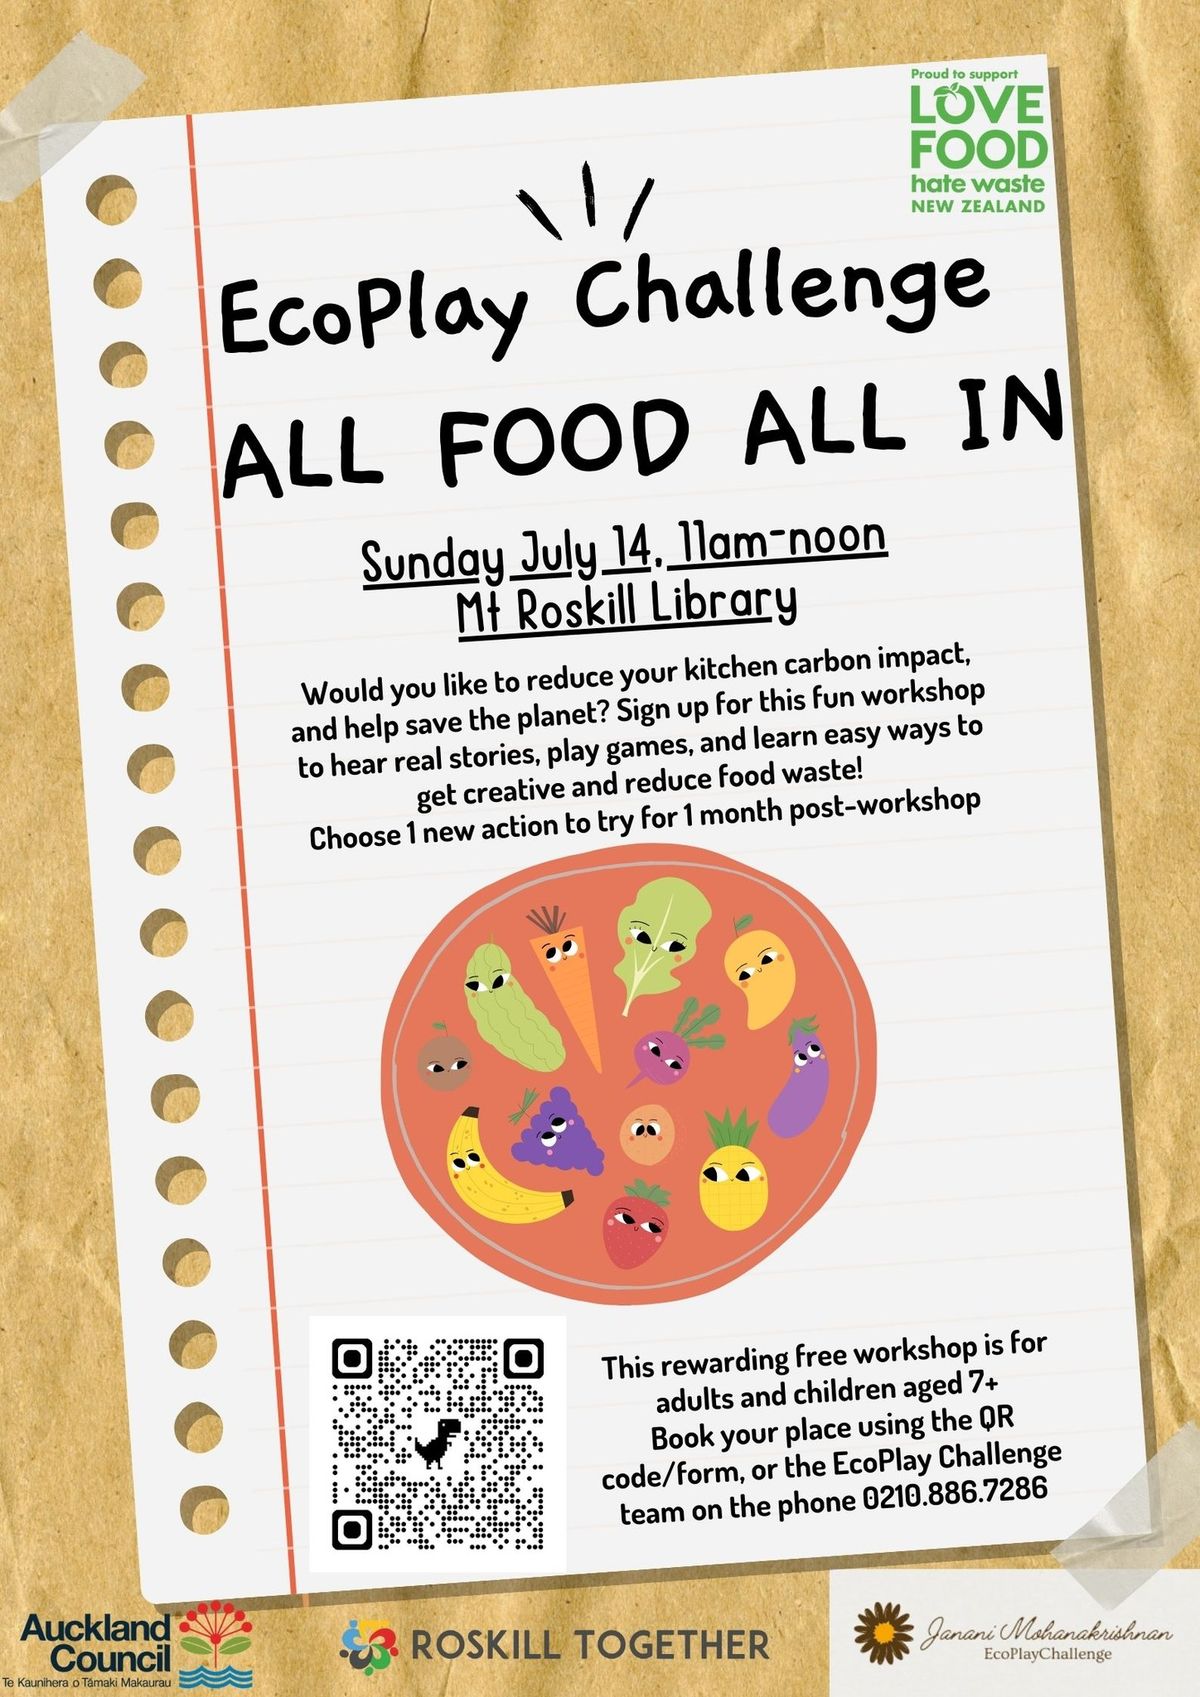 All Food All In (EcoPlay Challenge)